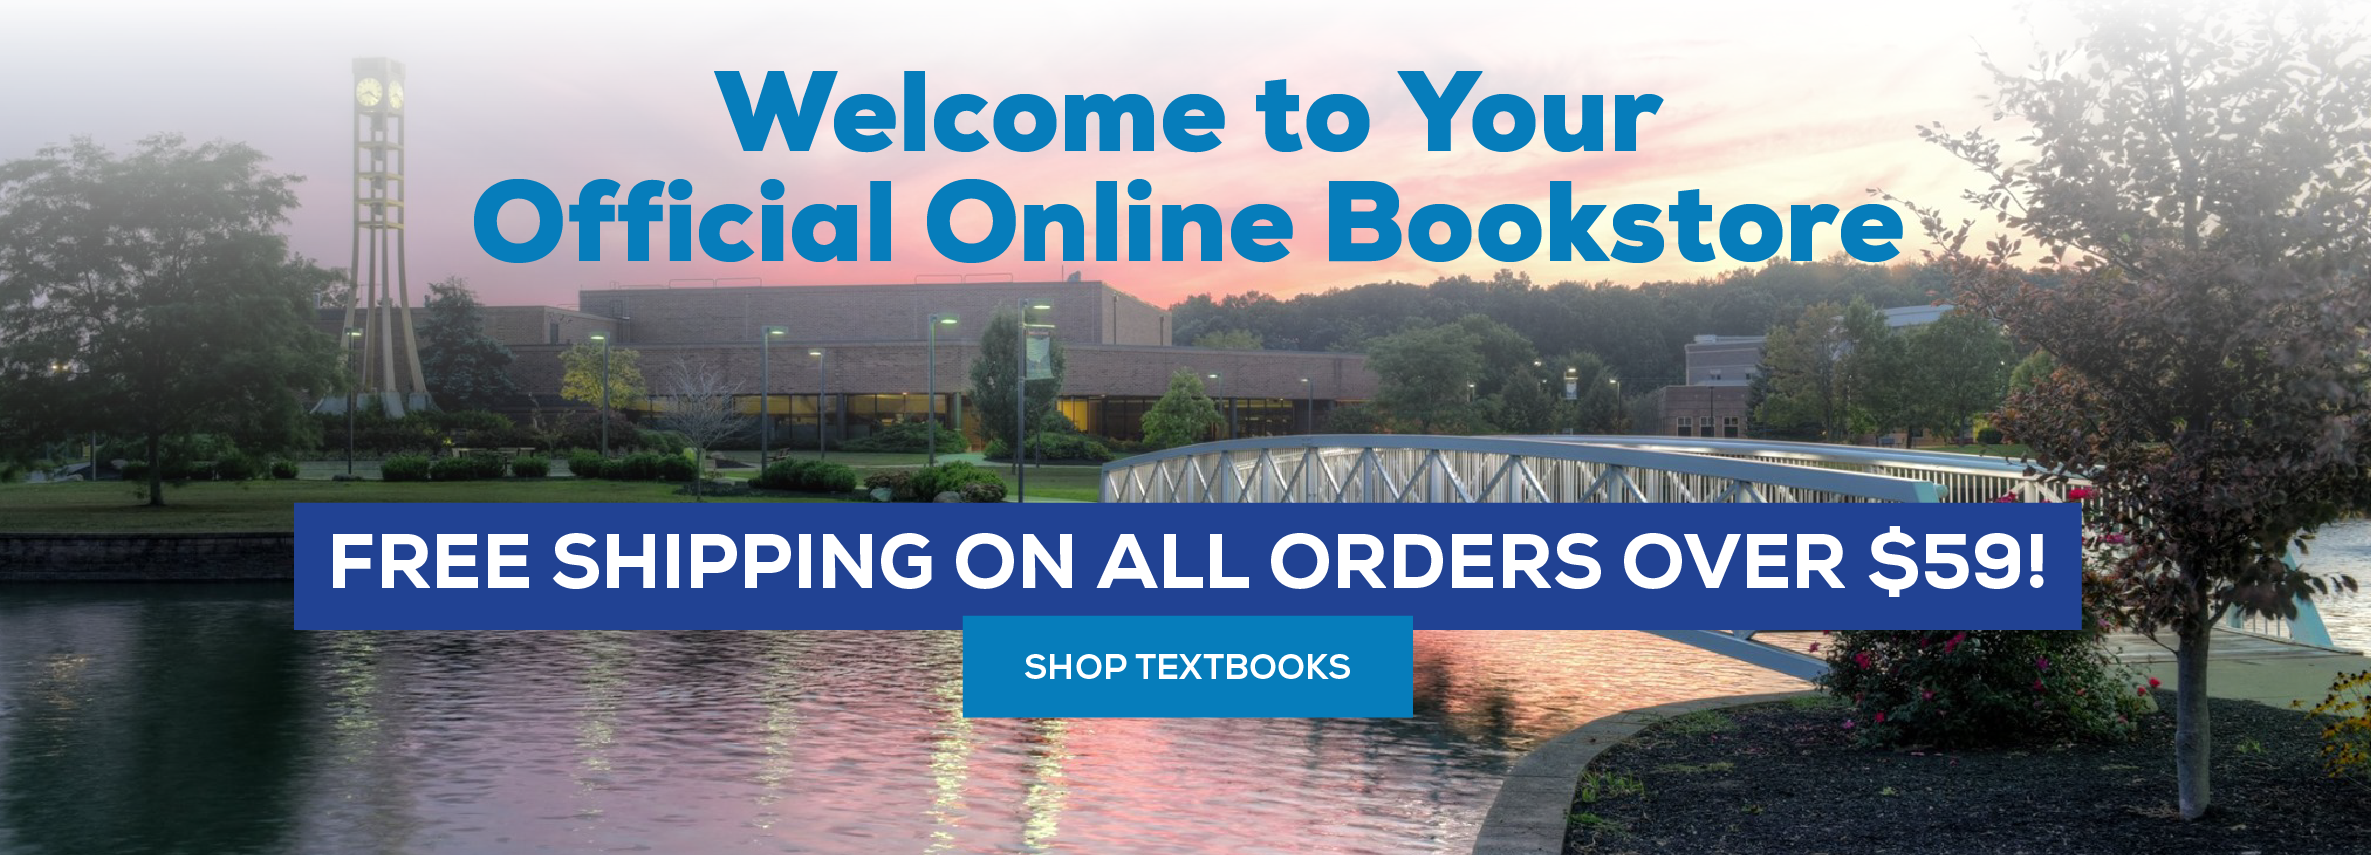 Welcome to your official online bookstore. free shipping on all orders over $59 Shop textbooks